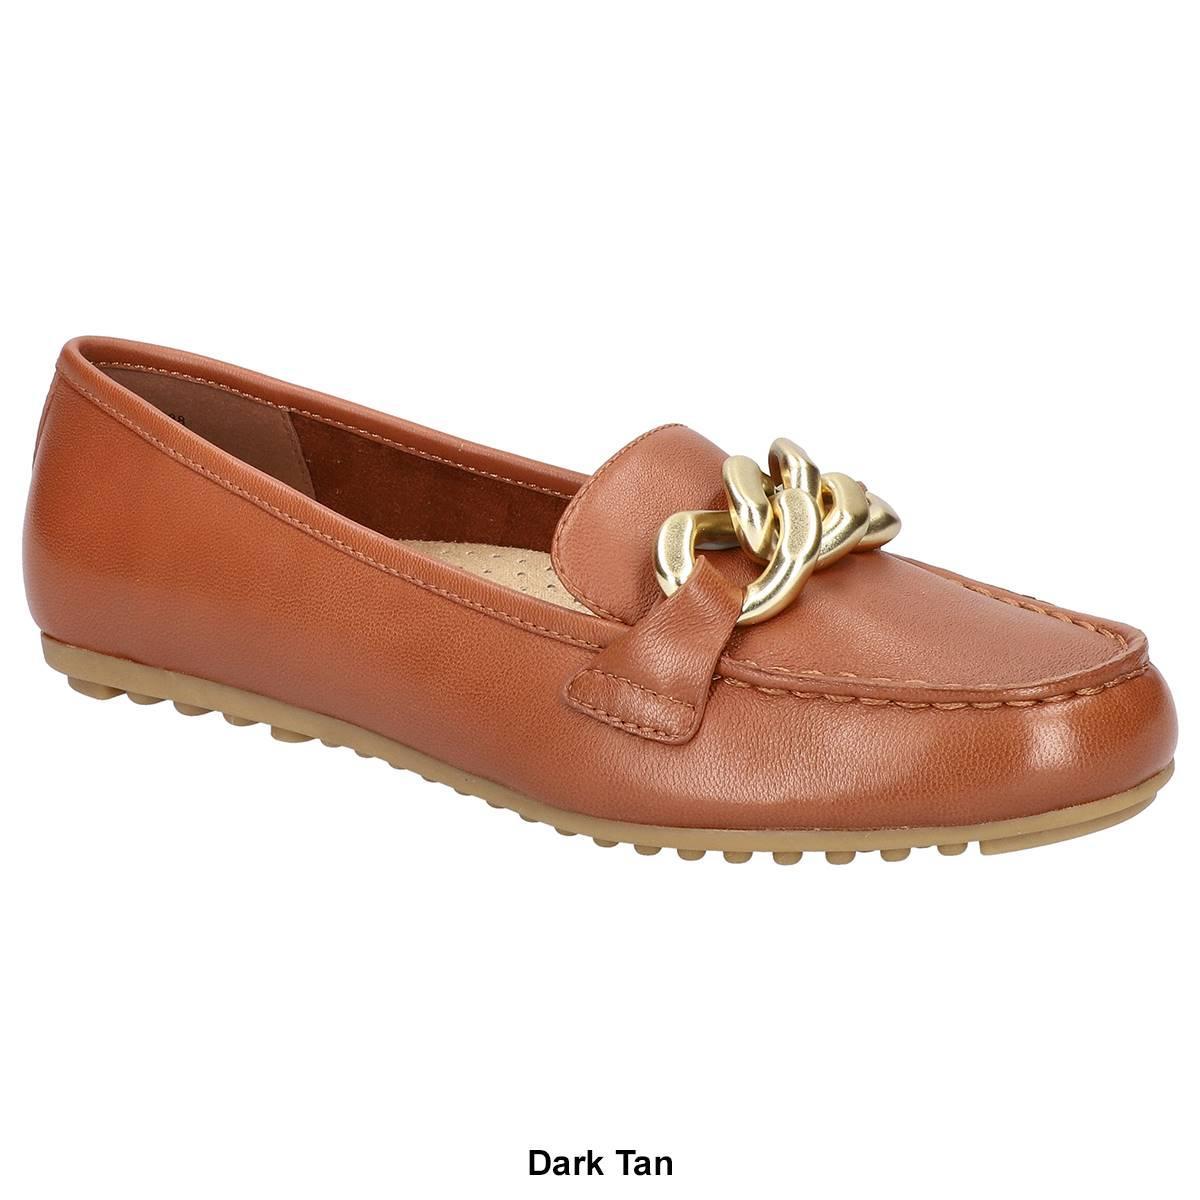 Bella Vita Cullen Driving Loafer Product Image